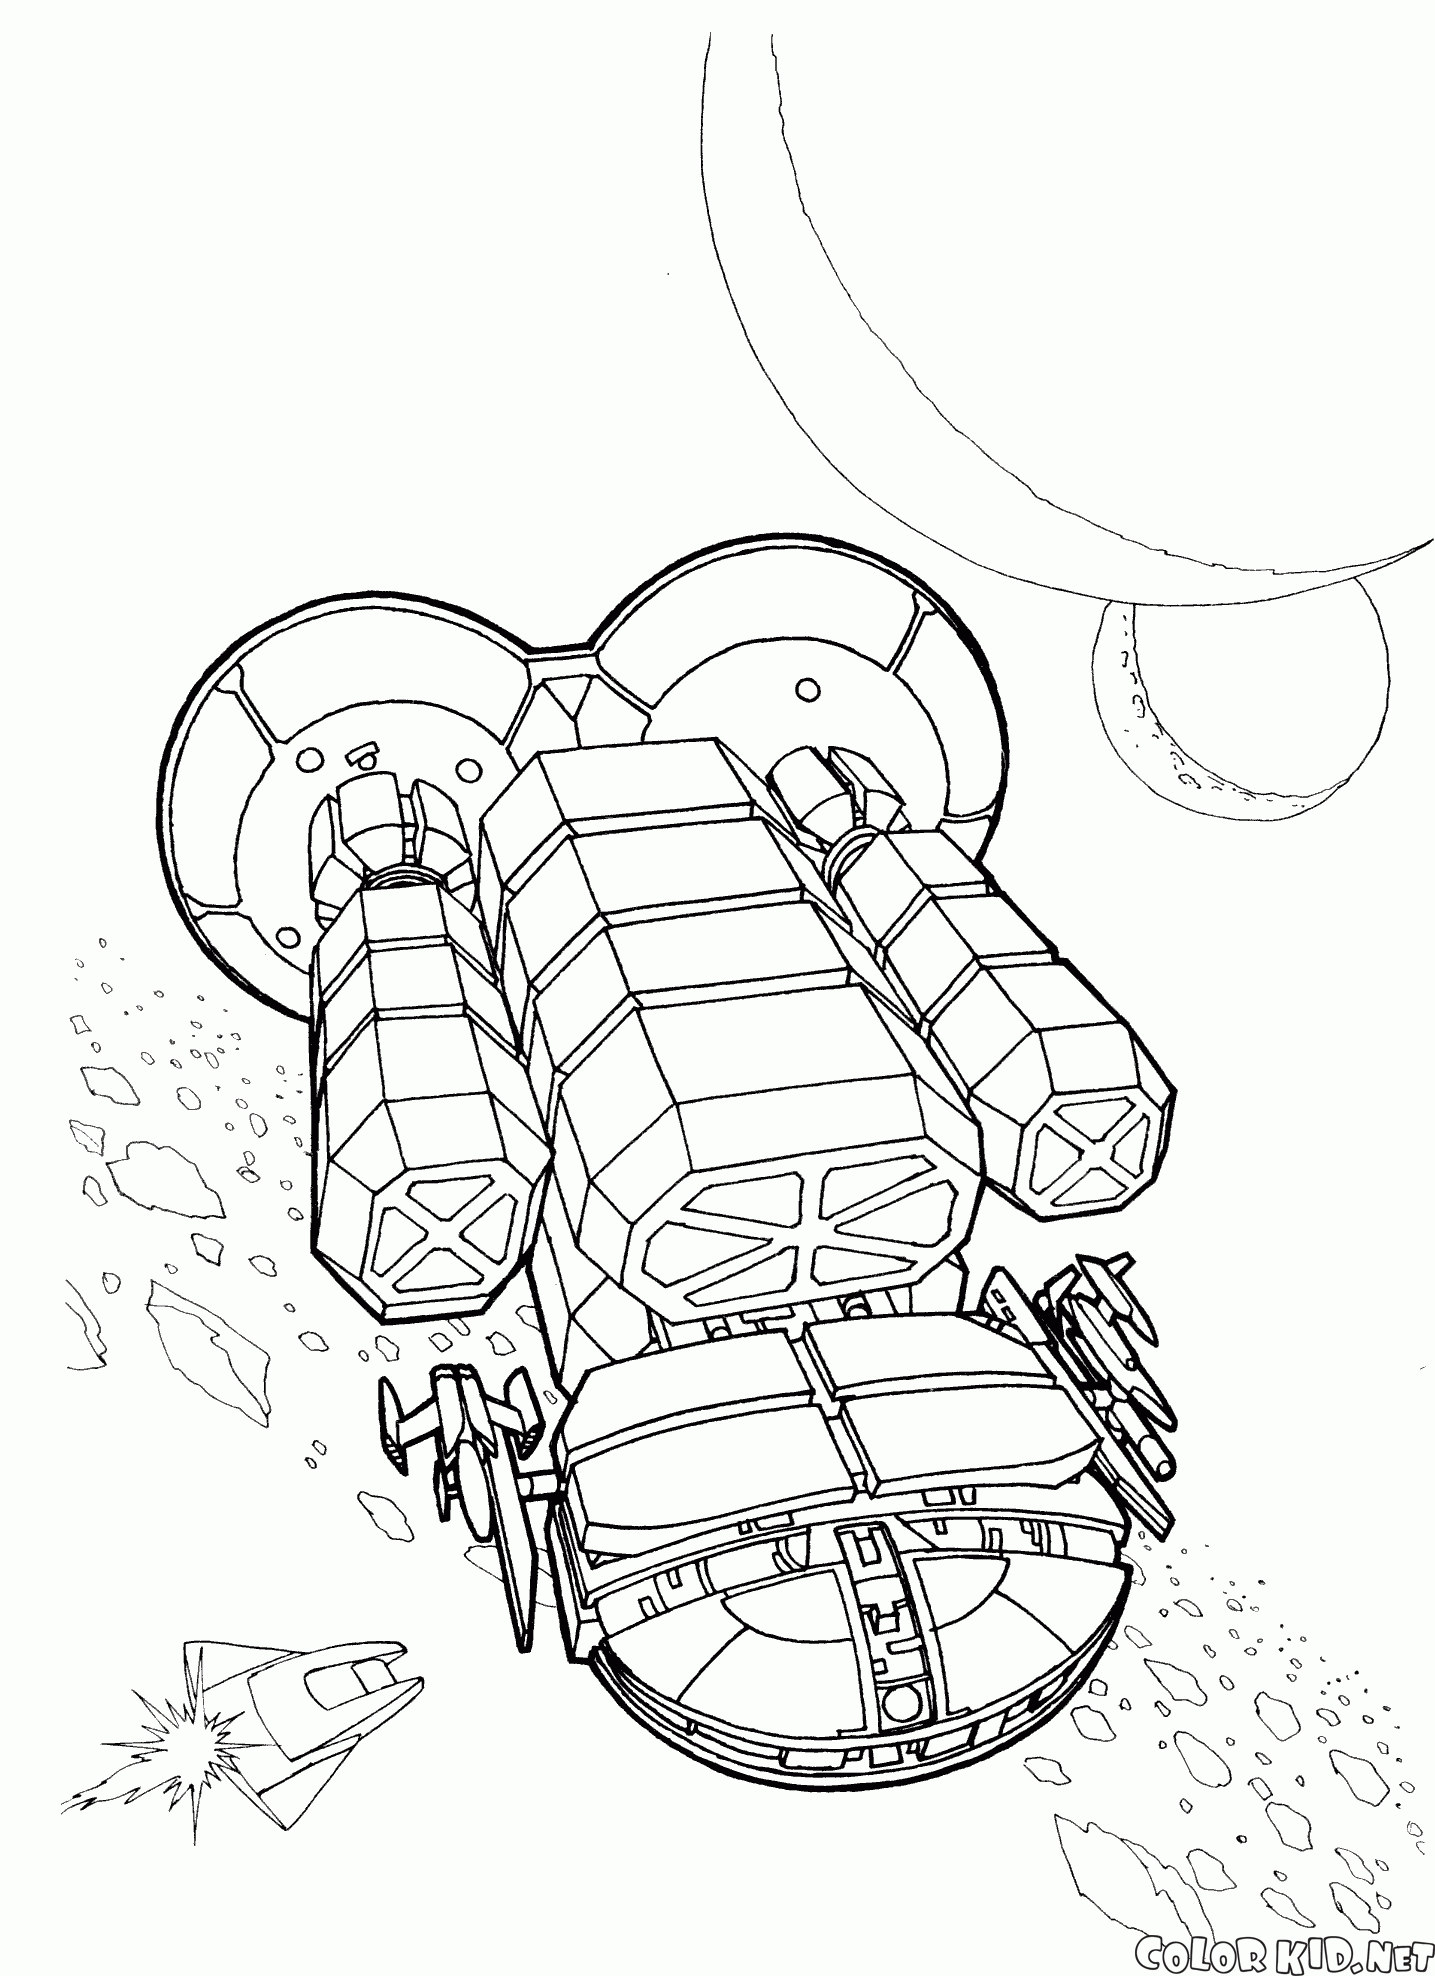 Futuristic Gun Coloring Page Coloring Pages